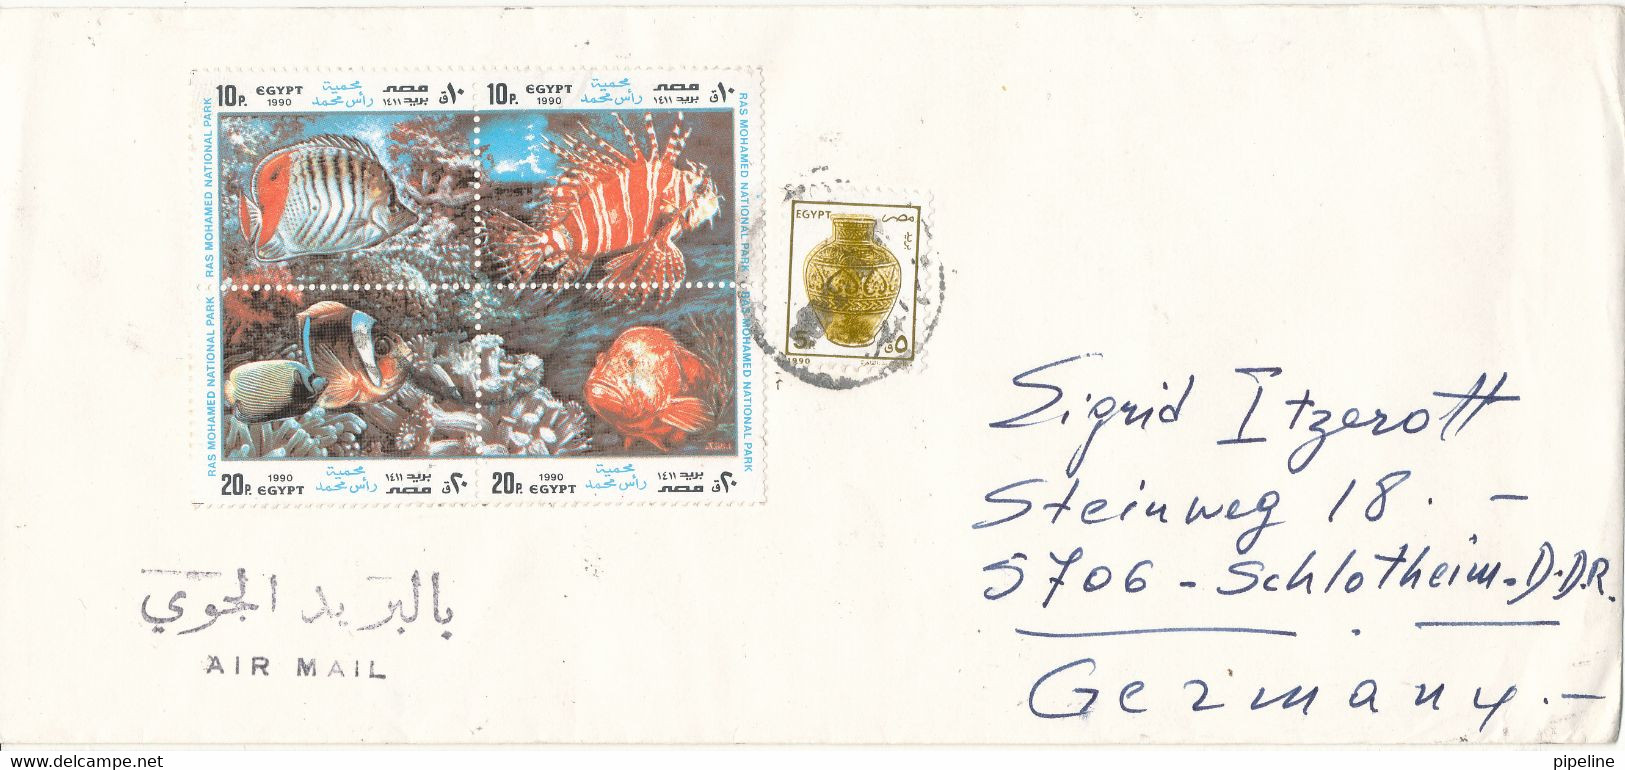 Egypt Cover Sent Air Mail To Germany Topic Stamps Ras Mohammed Natlonal Park Fish & Coral Reefs In A Block Of 4 - Briefe U. Dokumente